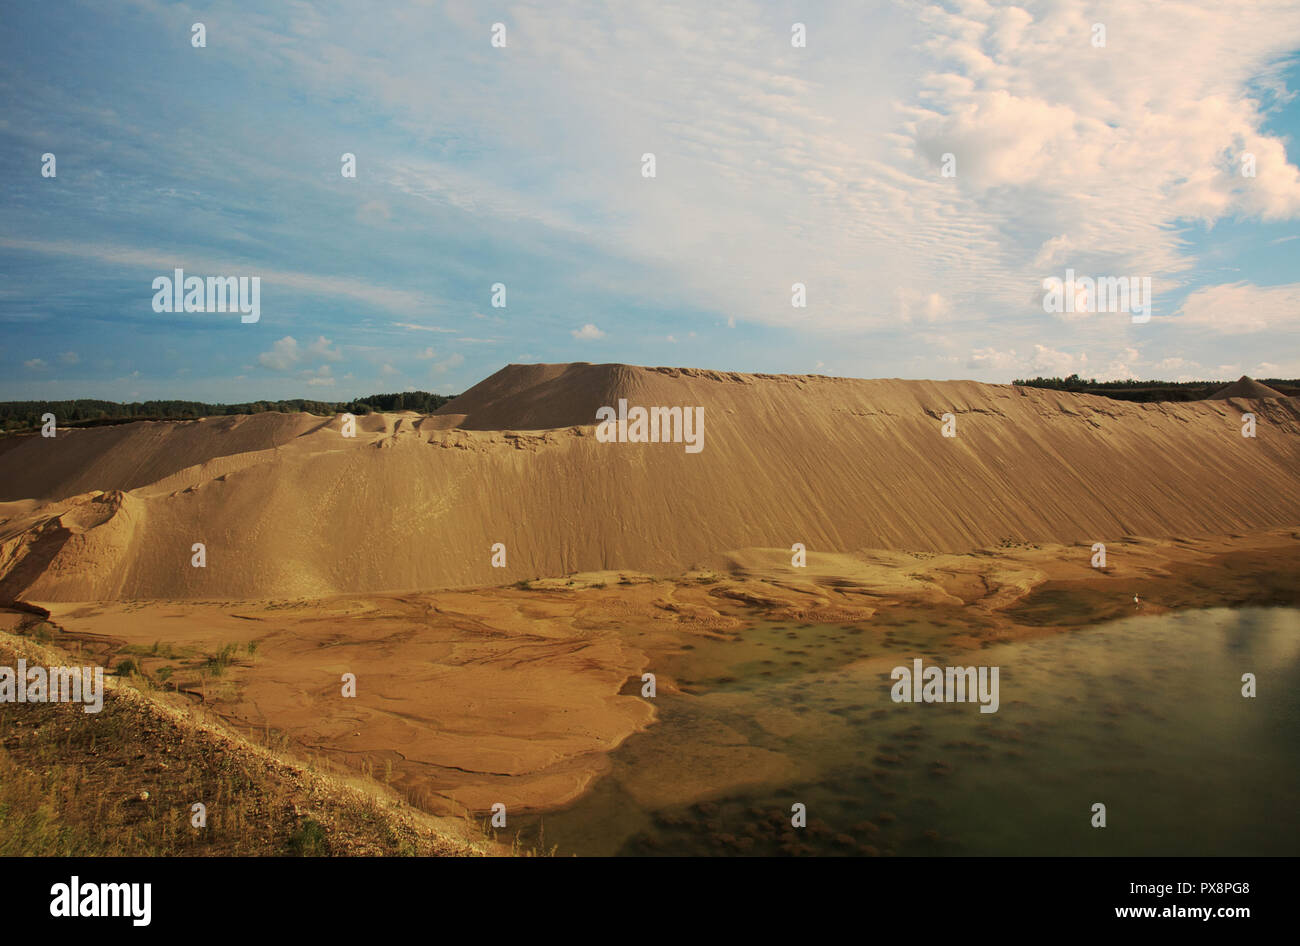 The view of the heaps of sand and pond was created after gravel pitting, against a background of blue sky with delicate, white clouds. Wide, horizonta Stock Photo